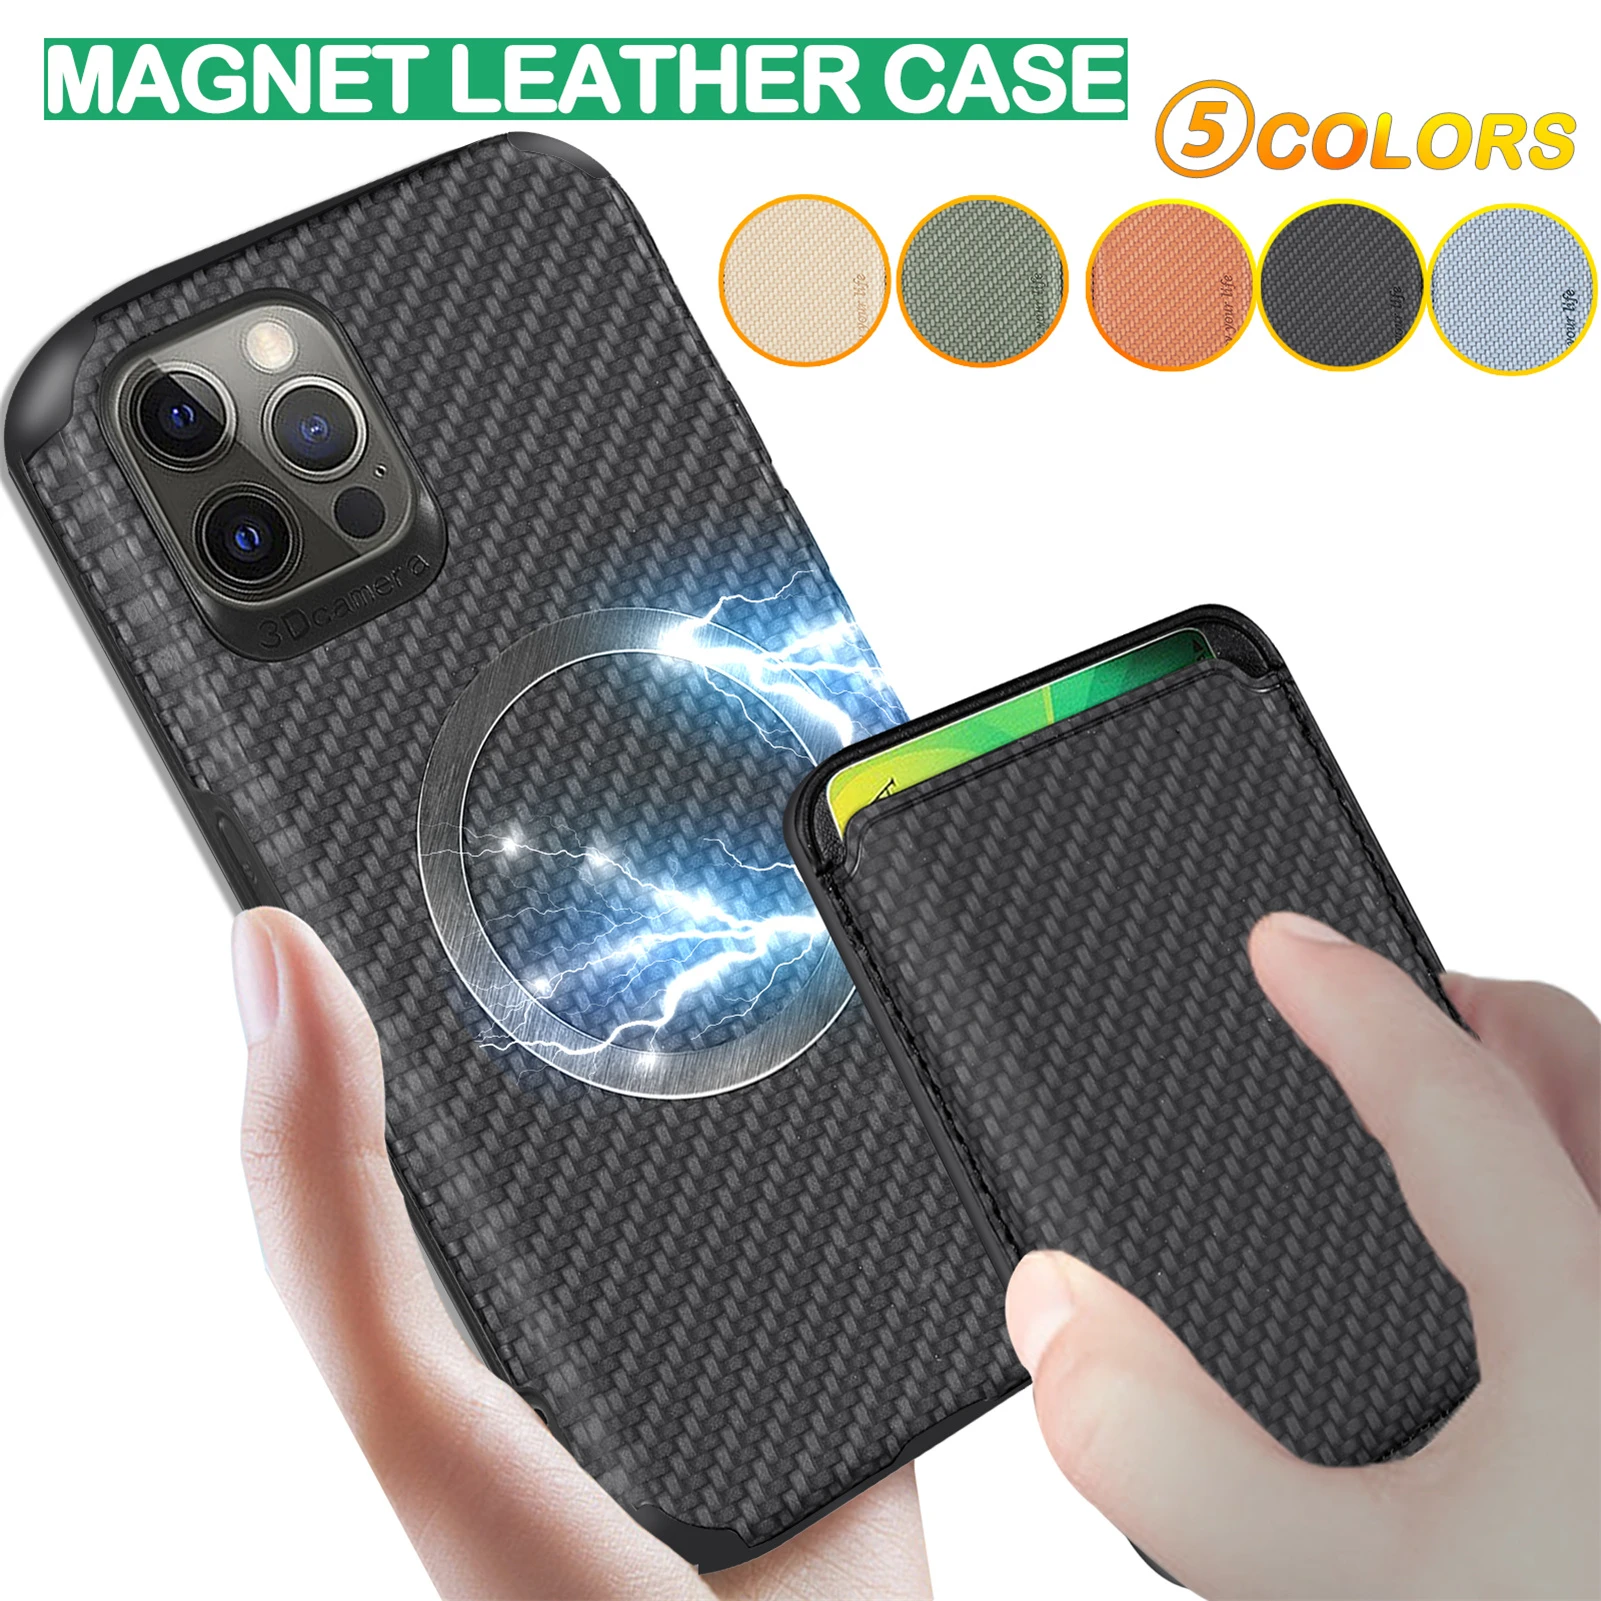 Carbon Fiber Magnetic Wallet Phone Case for IPhone 13 12 Mini 11 Pro XS Max XR X 7 8 6 6s Plus SE 2 3 Card Holder Leather Cover 13 cases